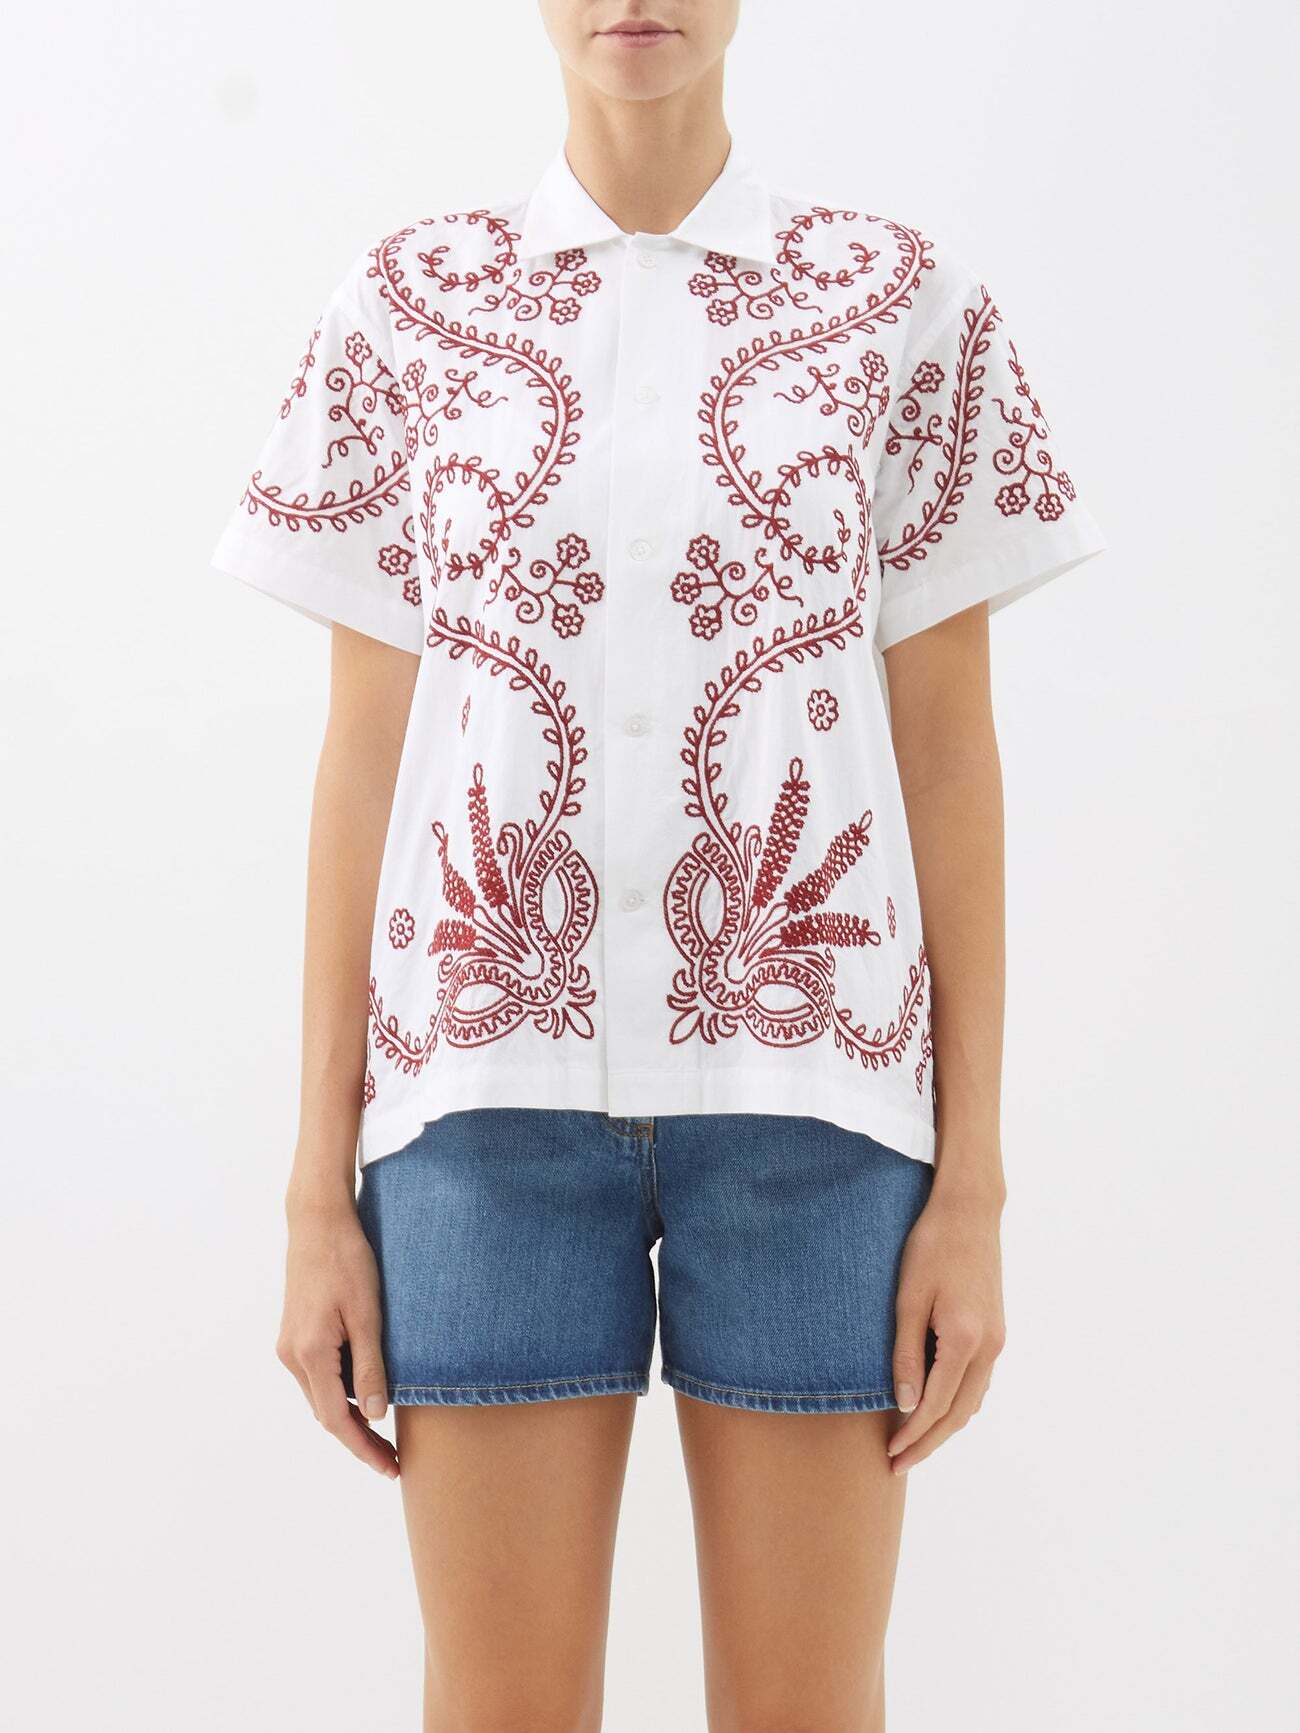 Bode - Pila Embroidered Cotton Shirt - Womens - Ivory Multi